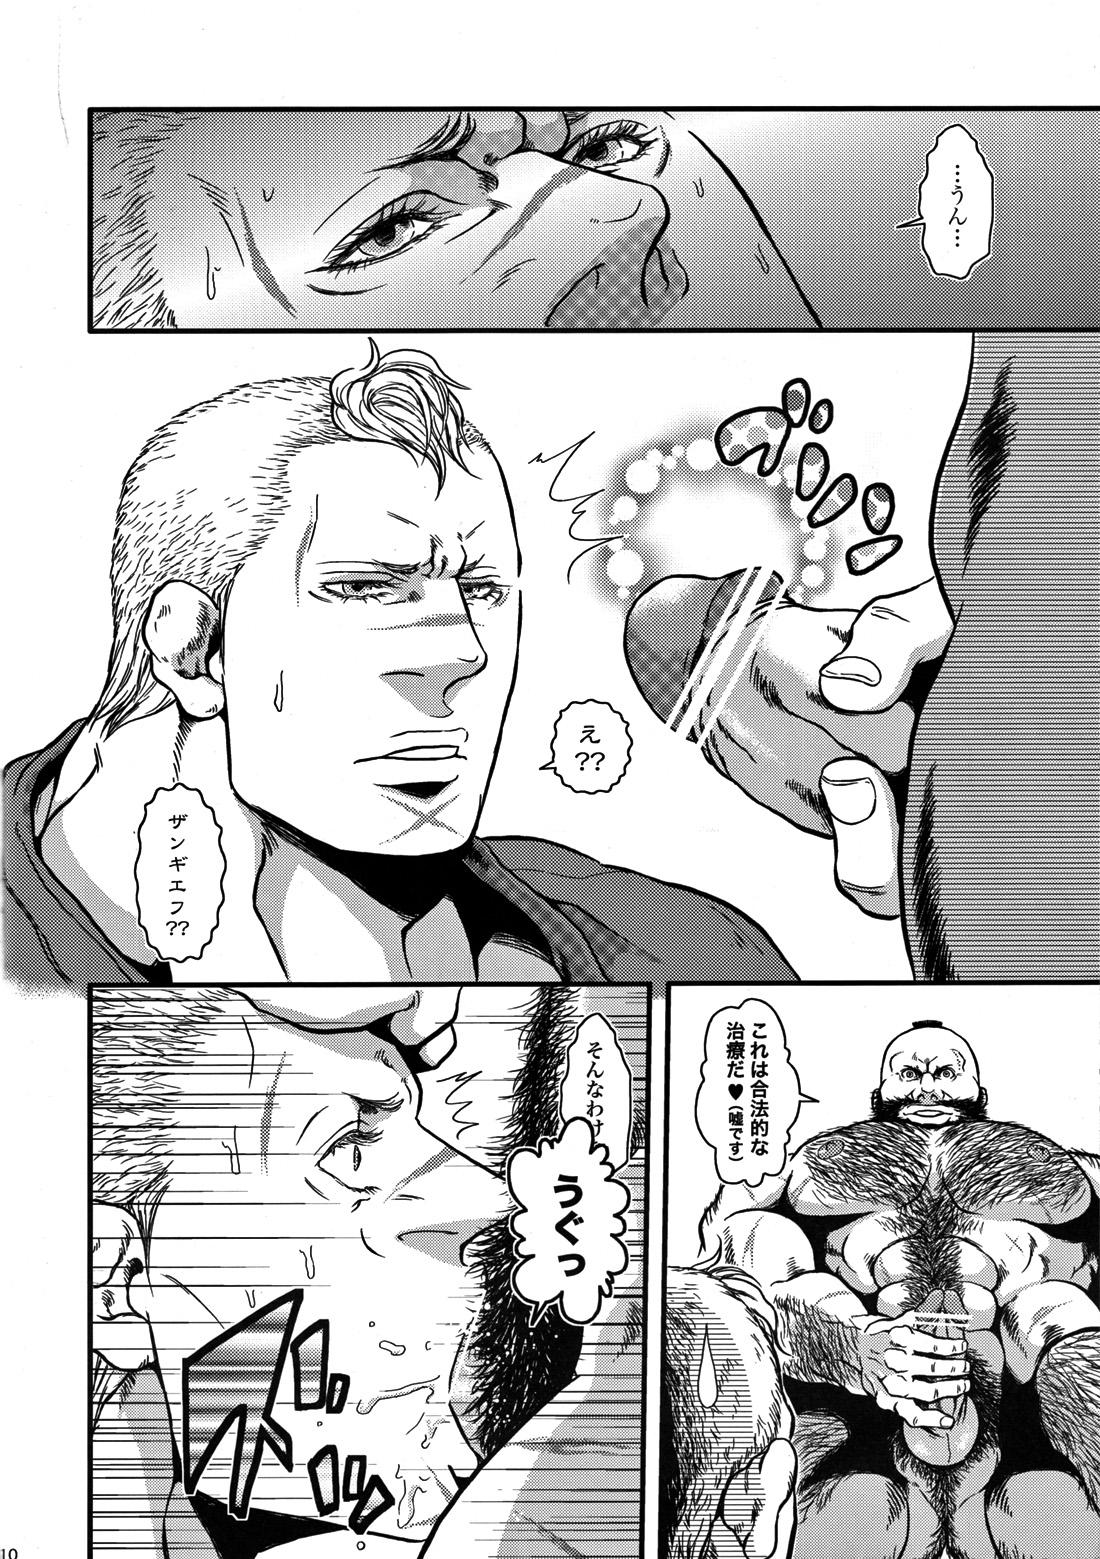 Masseur TOYED WITH FRENCH DOG - Street fighter 18yo - Page 9